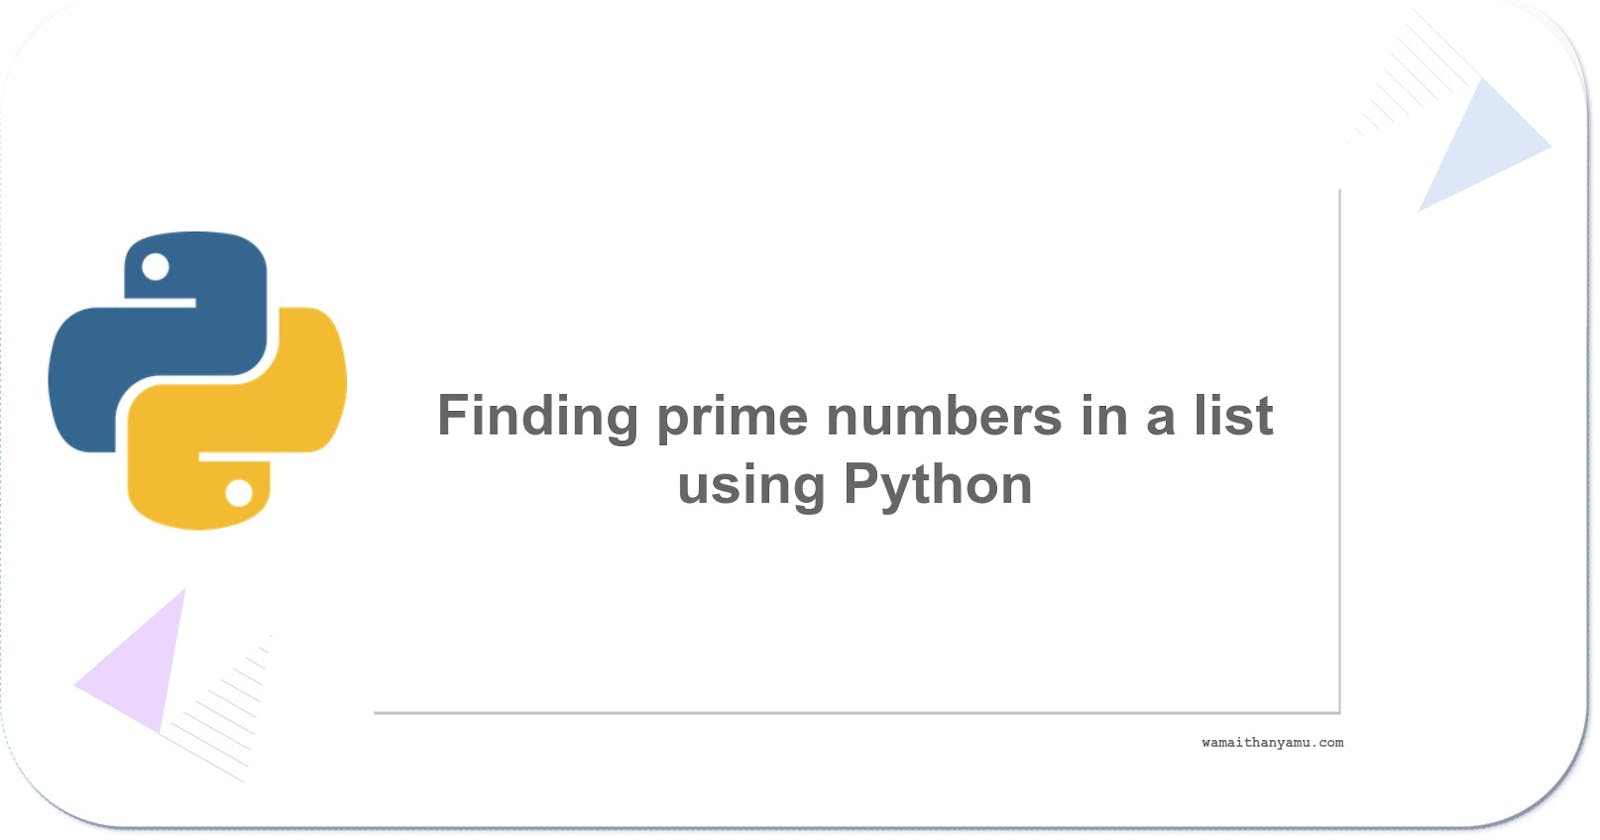 Finding prime numbers in a list using Python